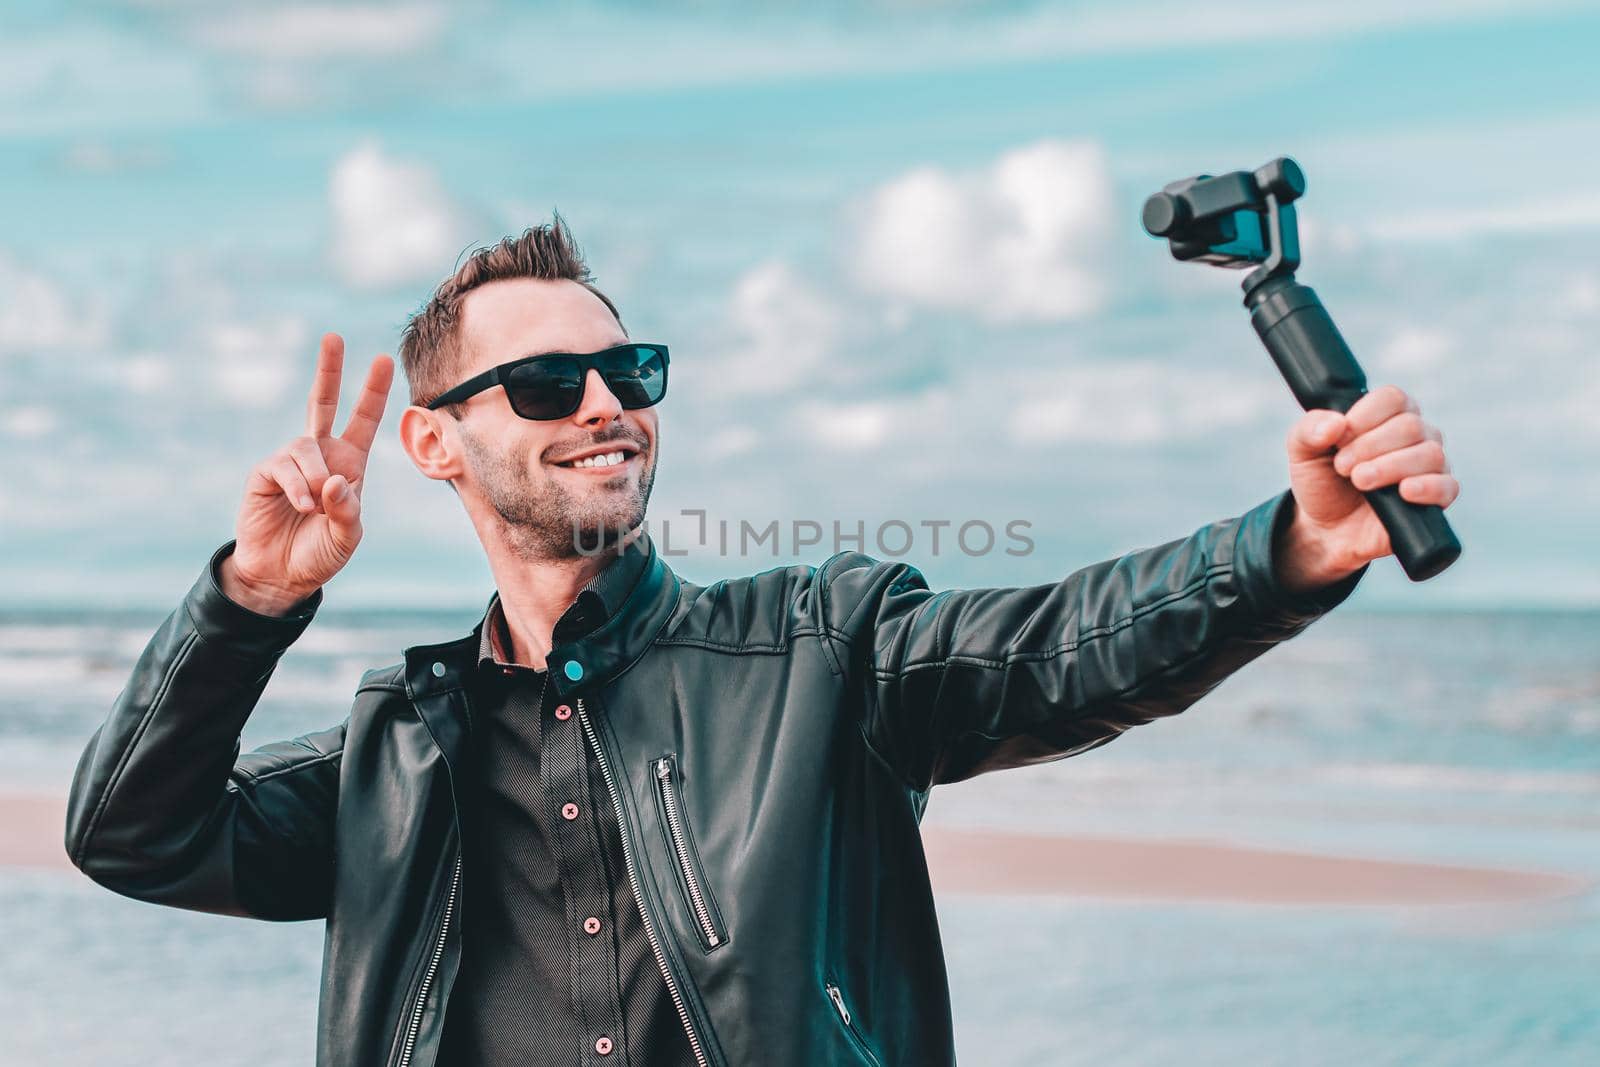 Youthful Blogger in Sunglasses Making Selfie or Streaming Video at the Beach Using Action Camera with Gimbal Camera Stabilizer. Handsome Man in Black Clothes Making Photo Against the Sea